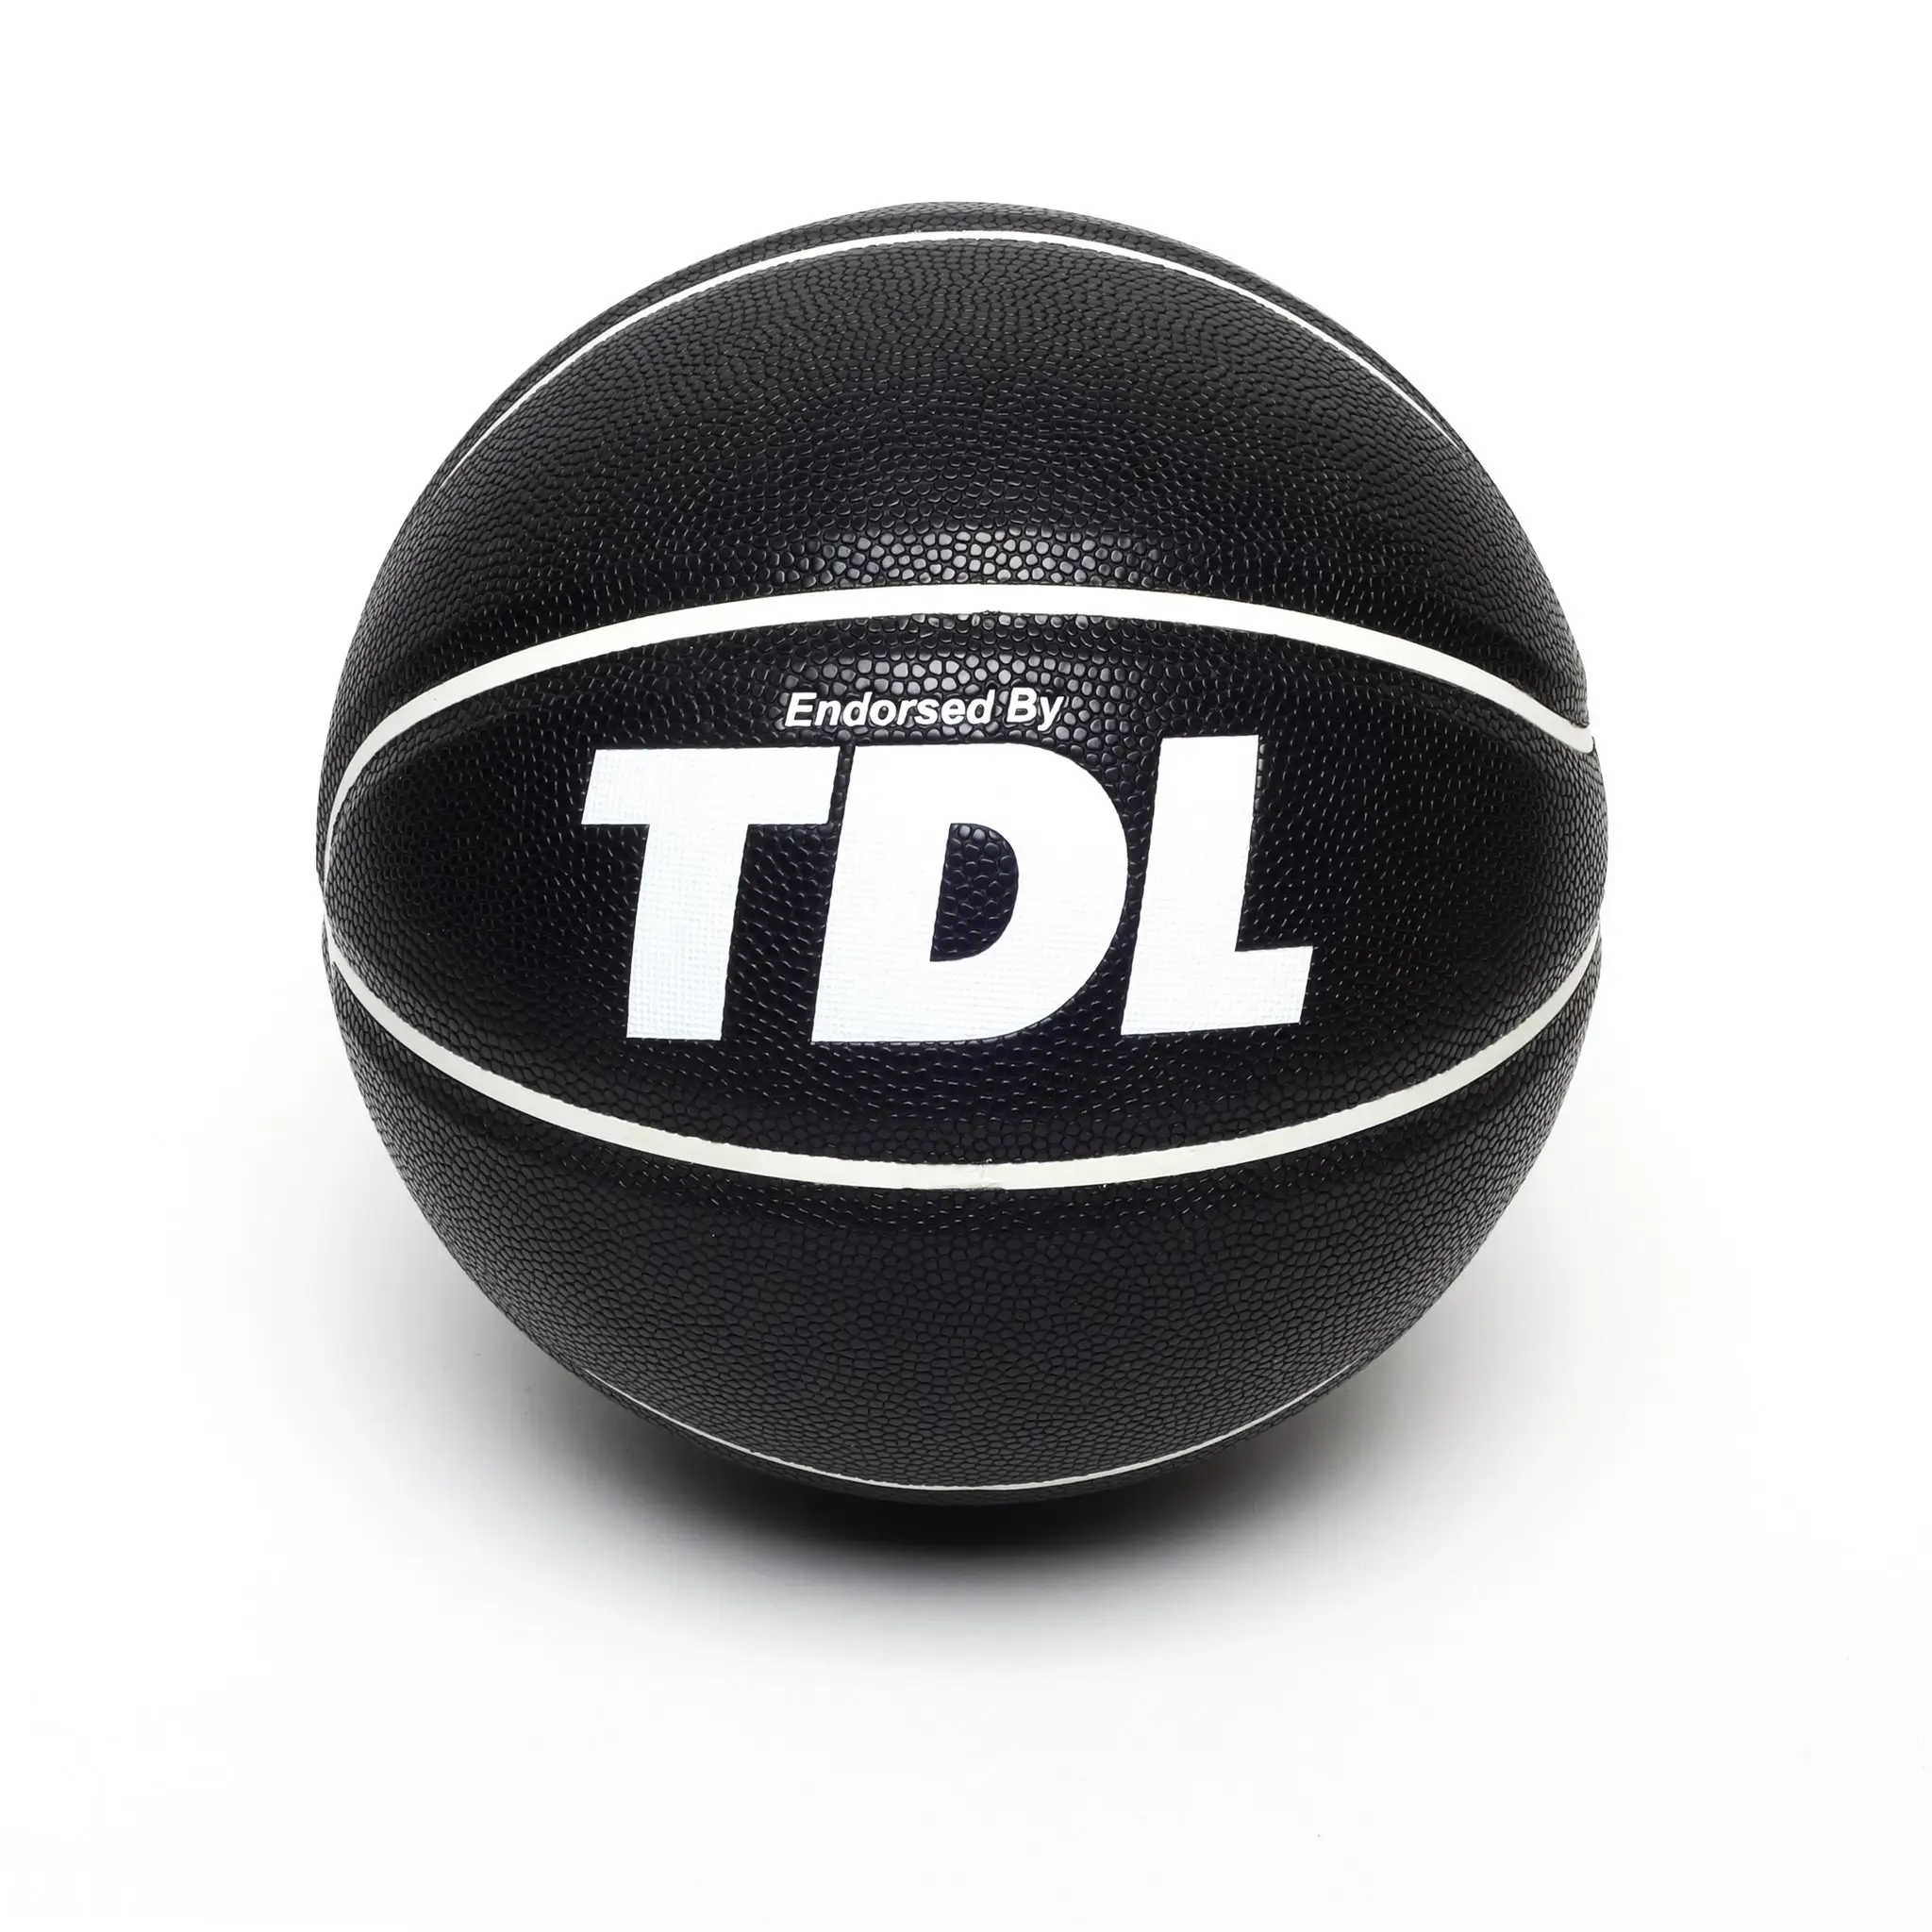 High Quality Hygroscopic PU Leather Basketball for Training